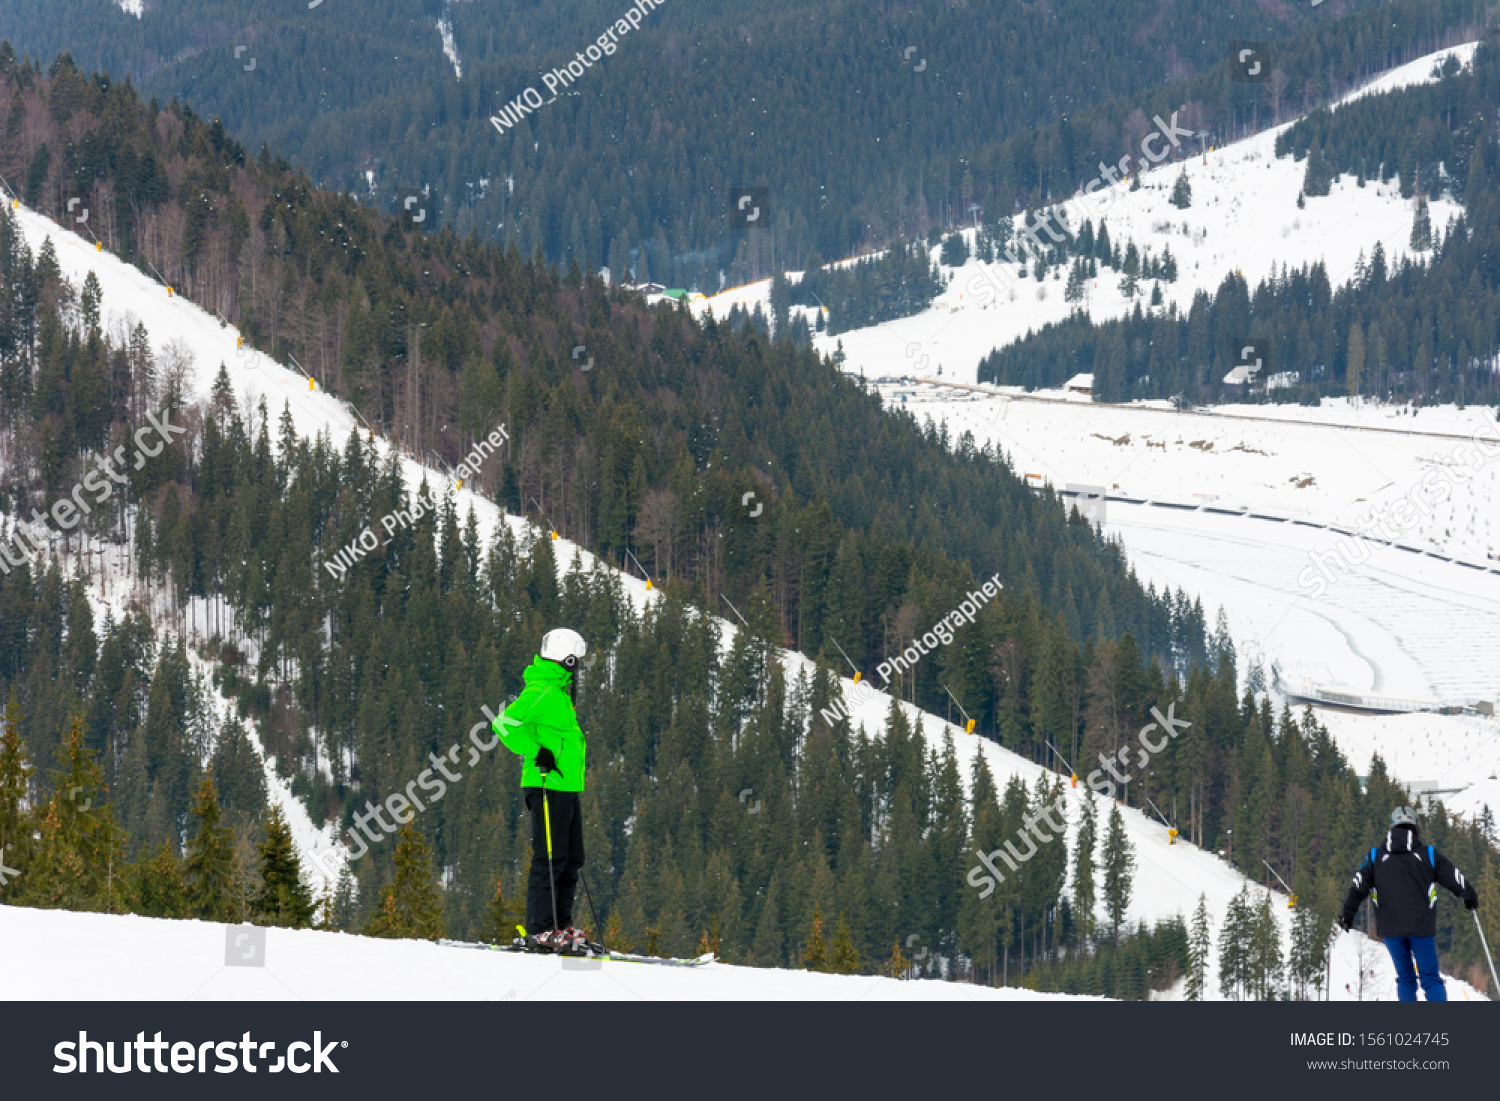 Skiers descend on the slopes of the Carpathian slopes and mountains, on the background are picturesque scenery and ski slopes. #1561024745